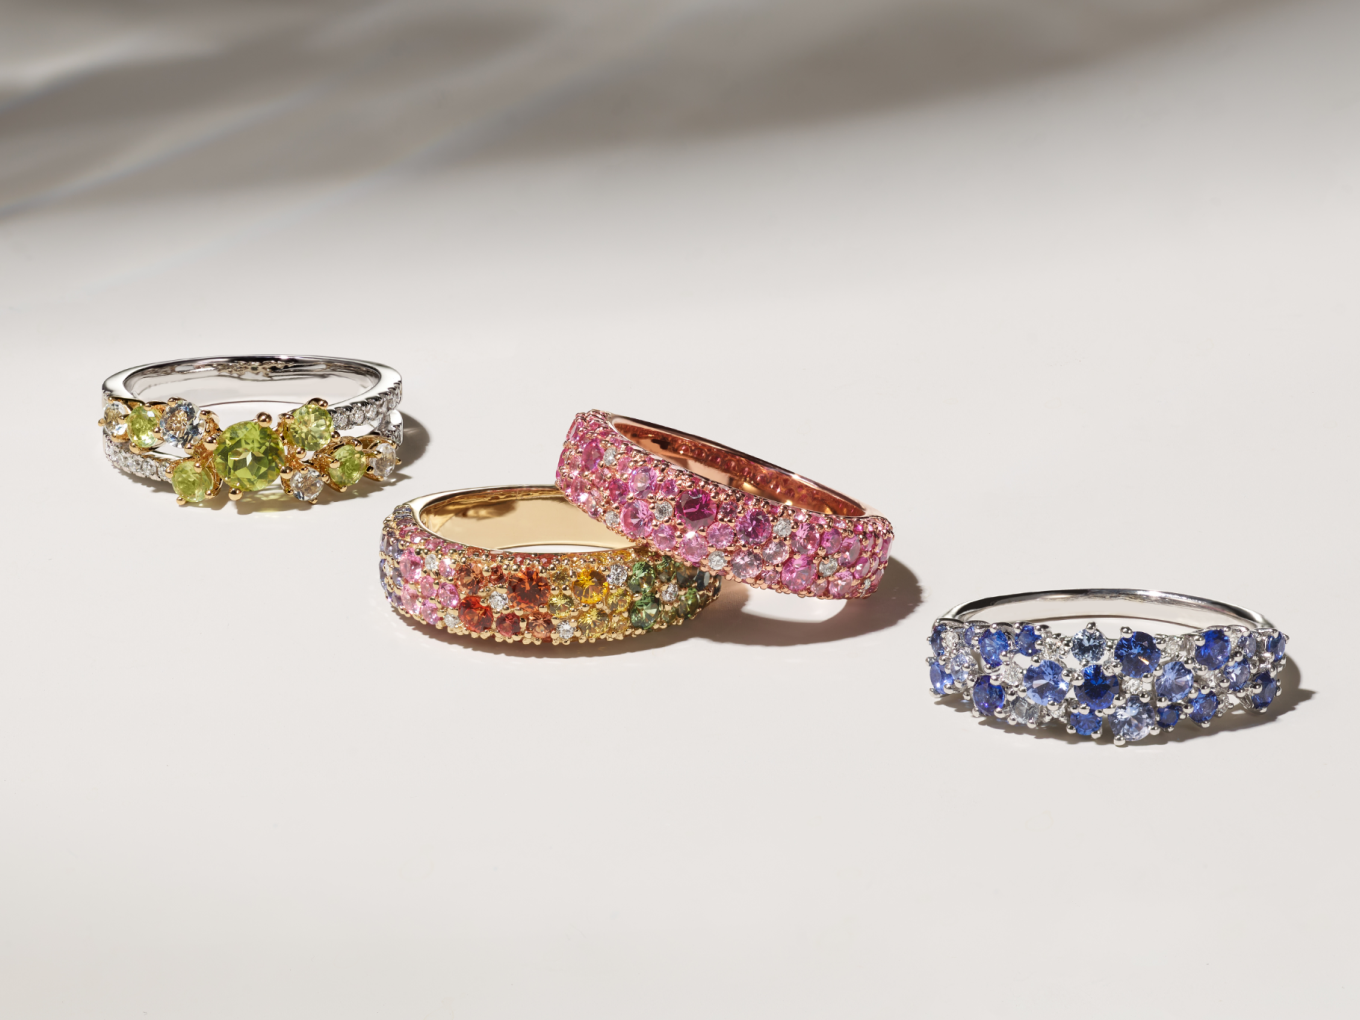 4 diamond and gemstone encrusted bands